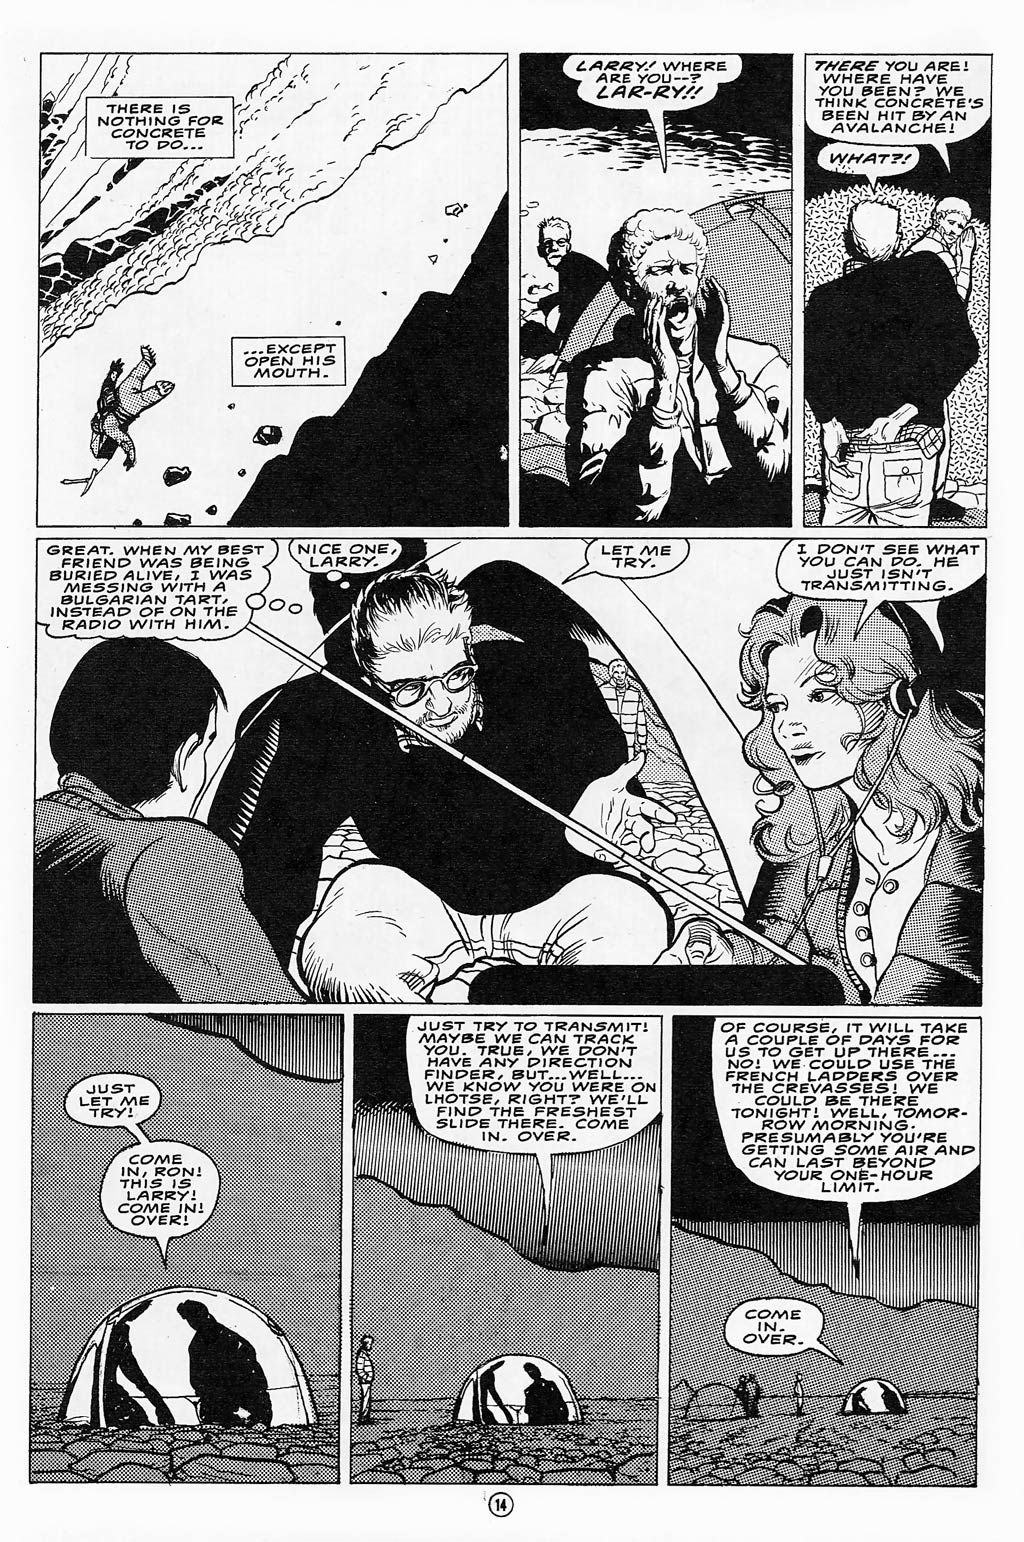 Concrete (1987) issue 9 - Page 16